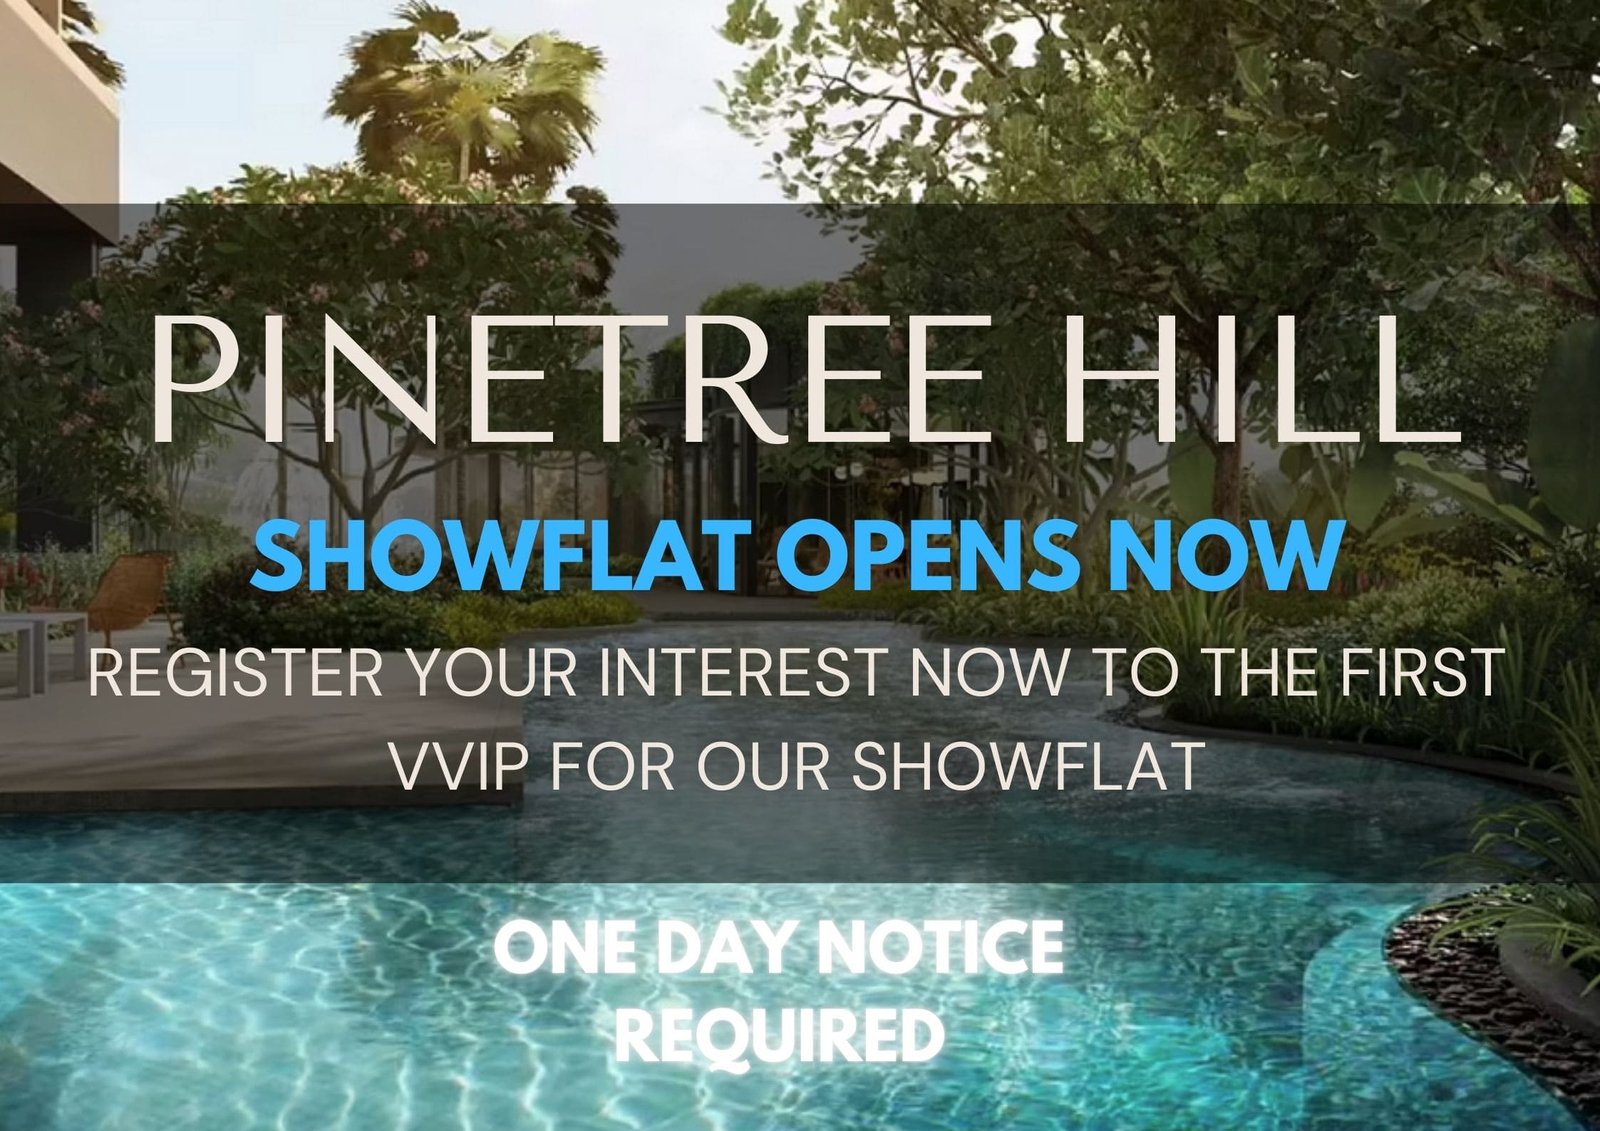 pinetree-hill-showflat-opening-notice